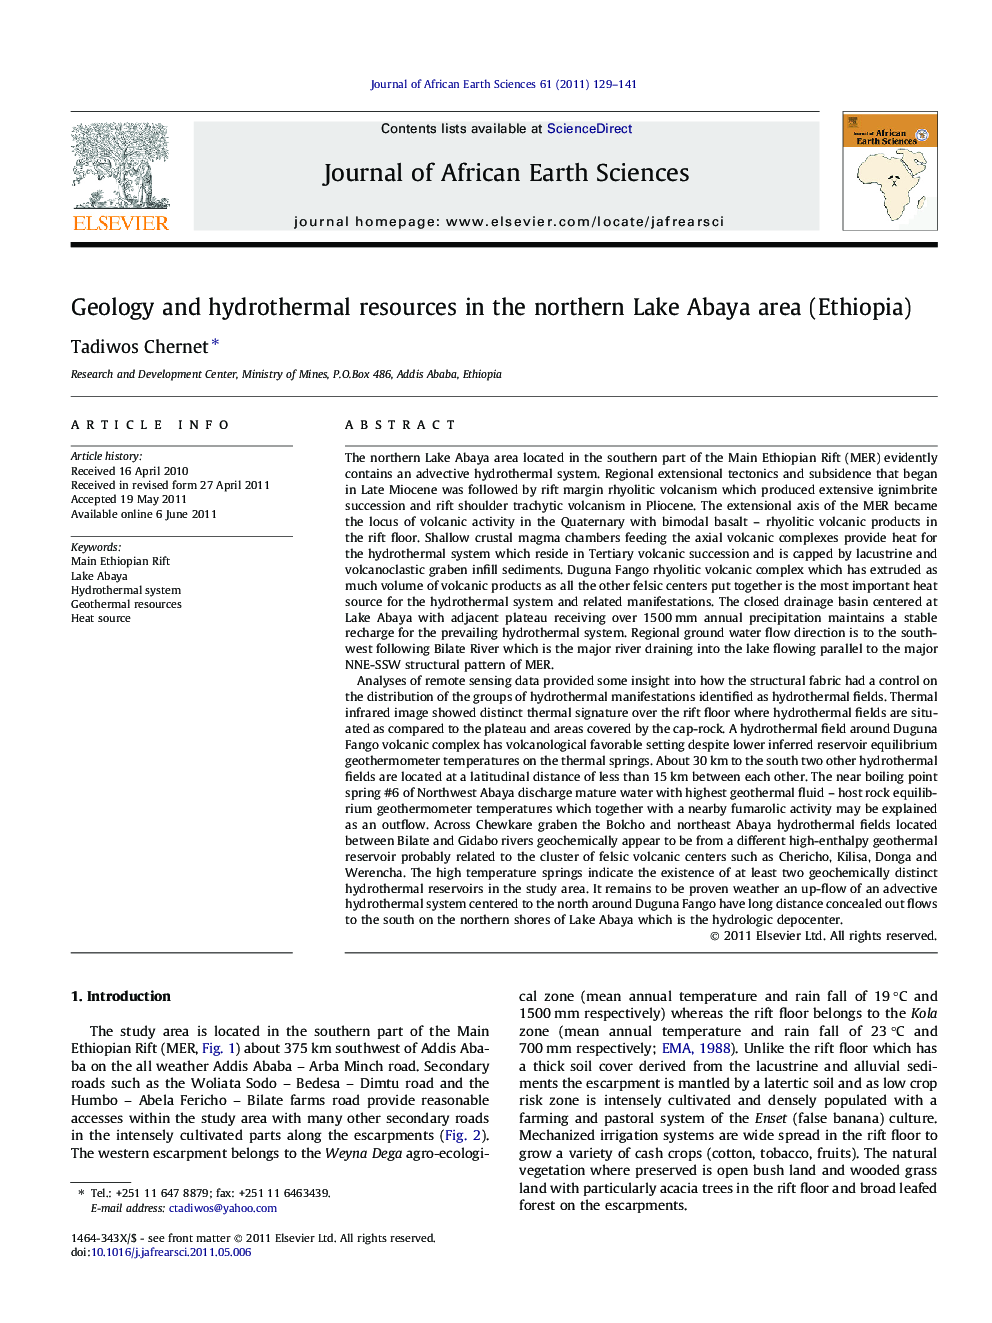 Geology and hydrothermal resources in the northern Lake Abaya area (Ethiopia)